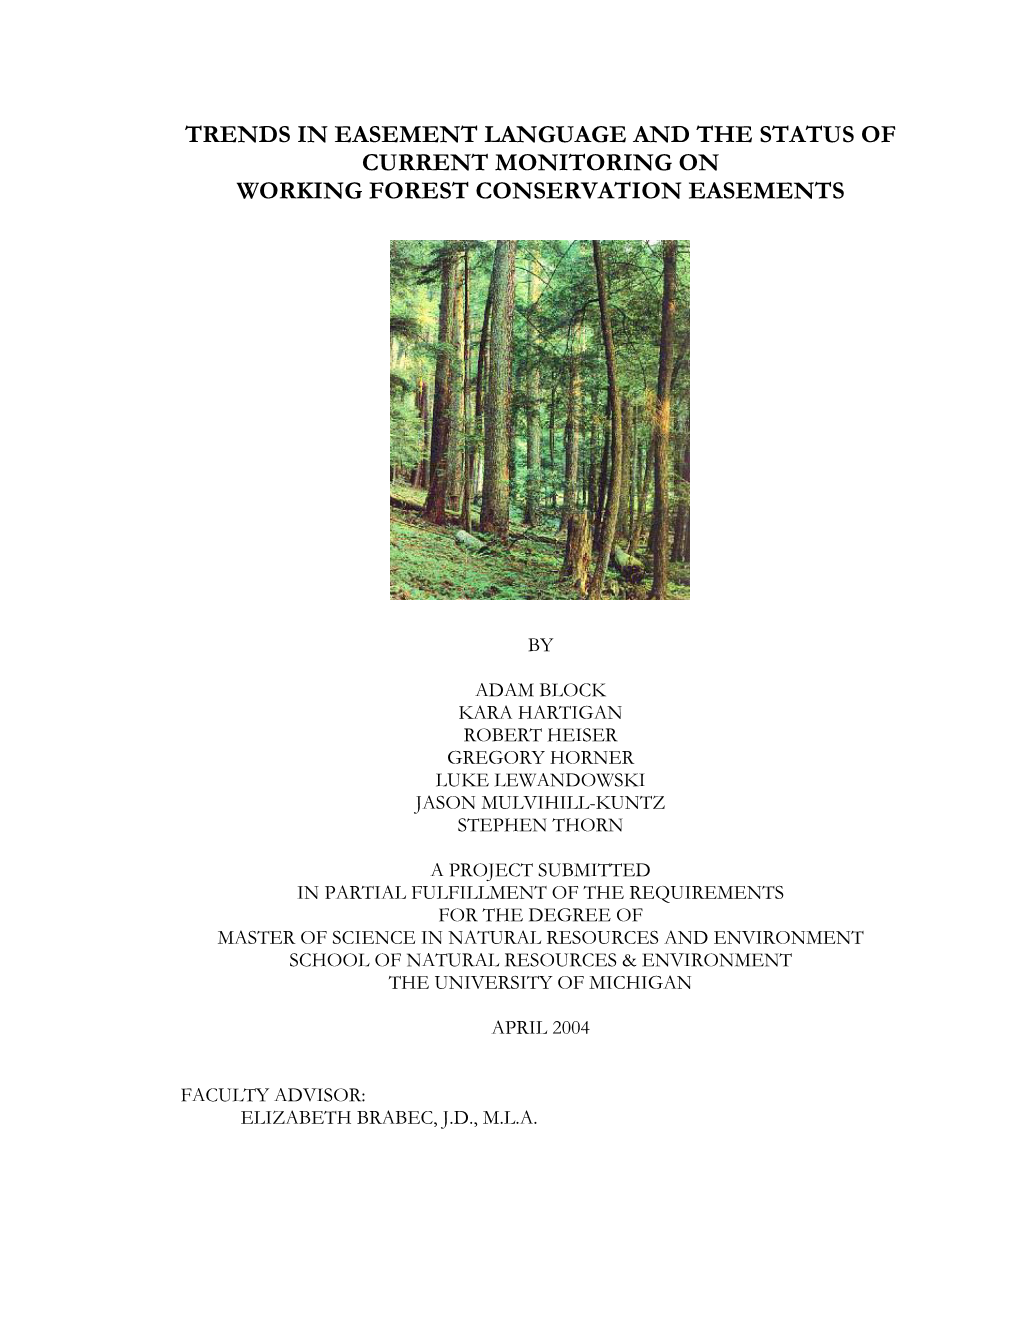 Trends in Easement Language and the Status of Current Monitoring on Working Forest Conservation Easements